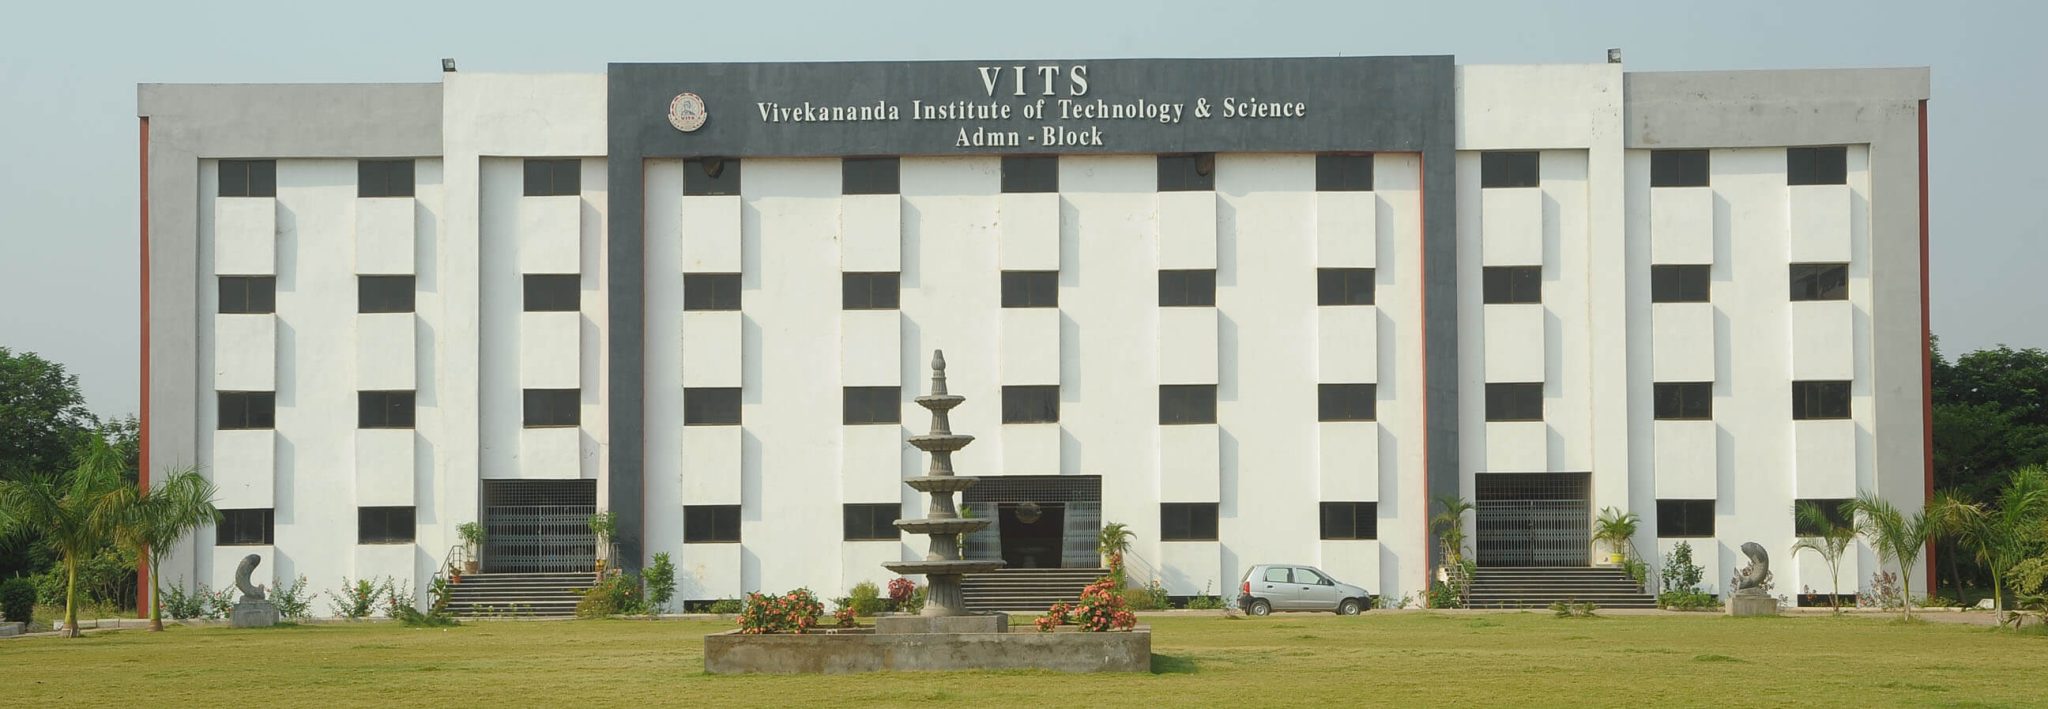 Vivekananda Institute of Technology and Science